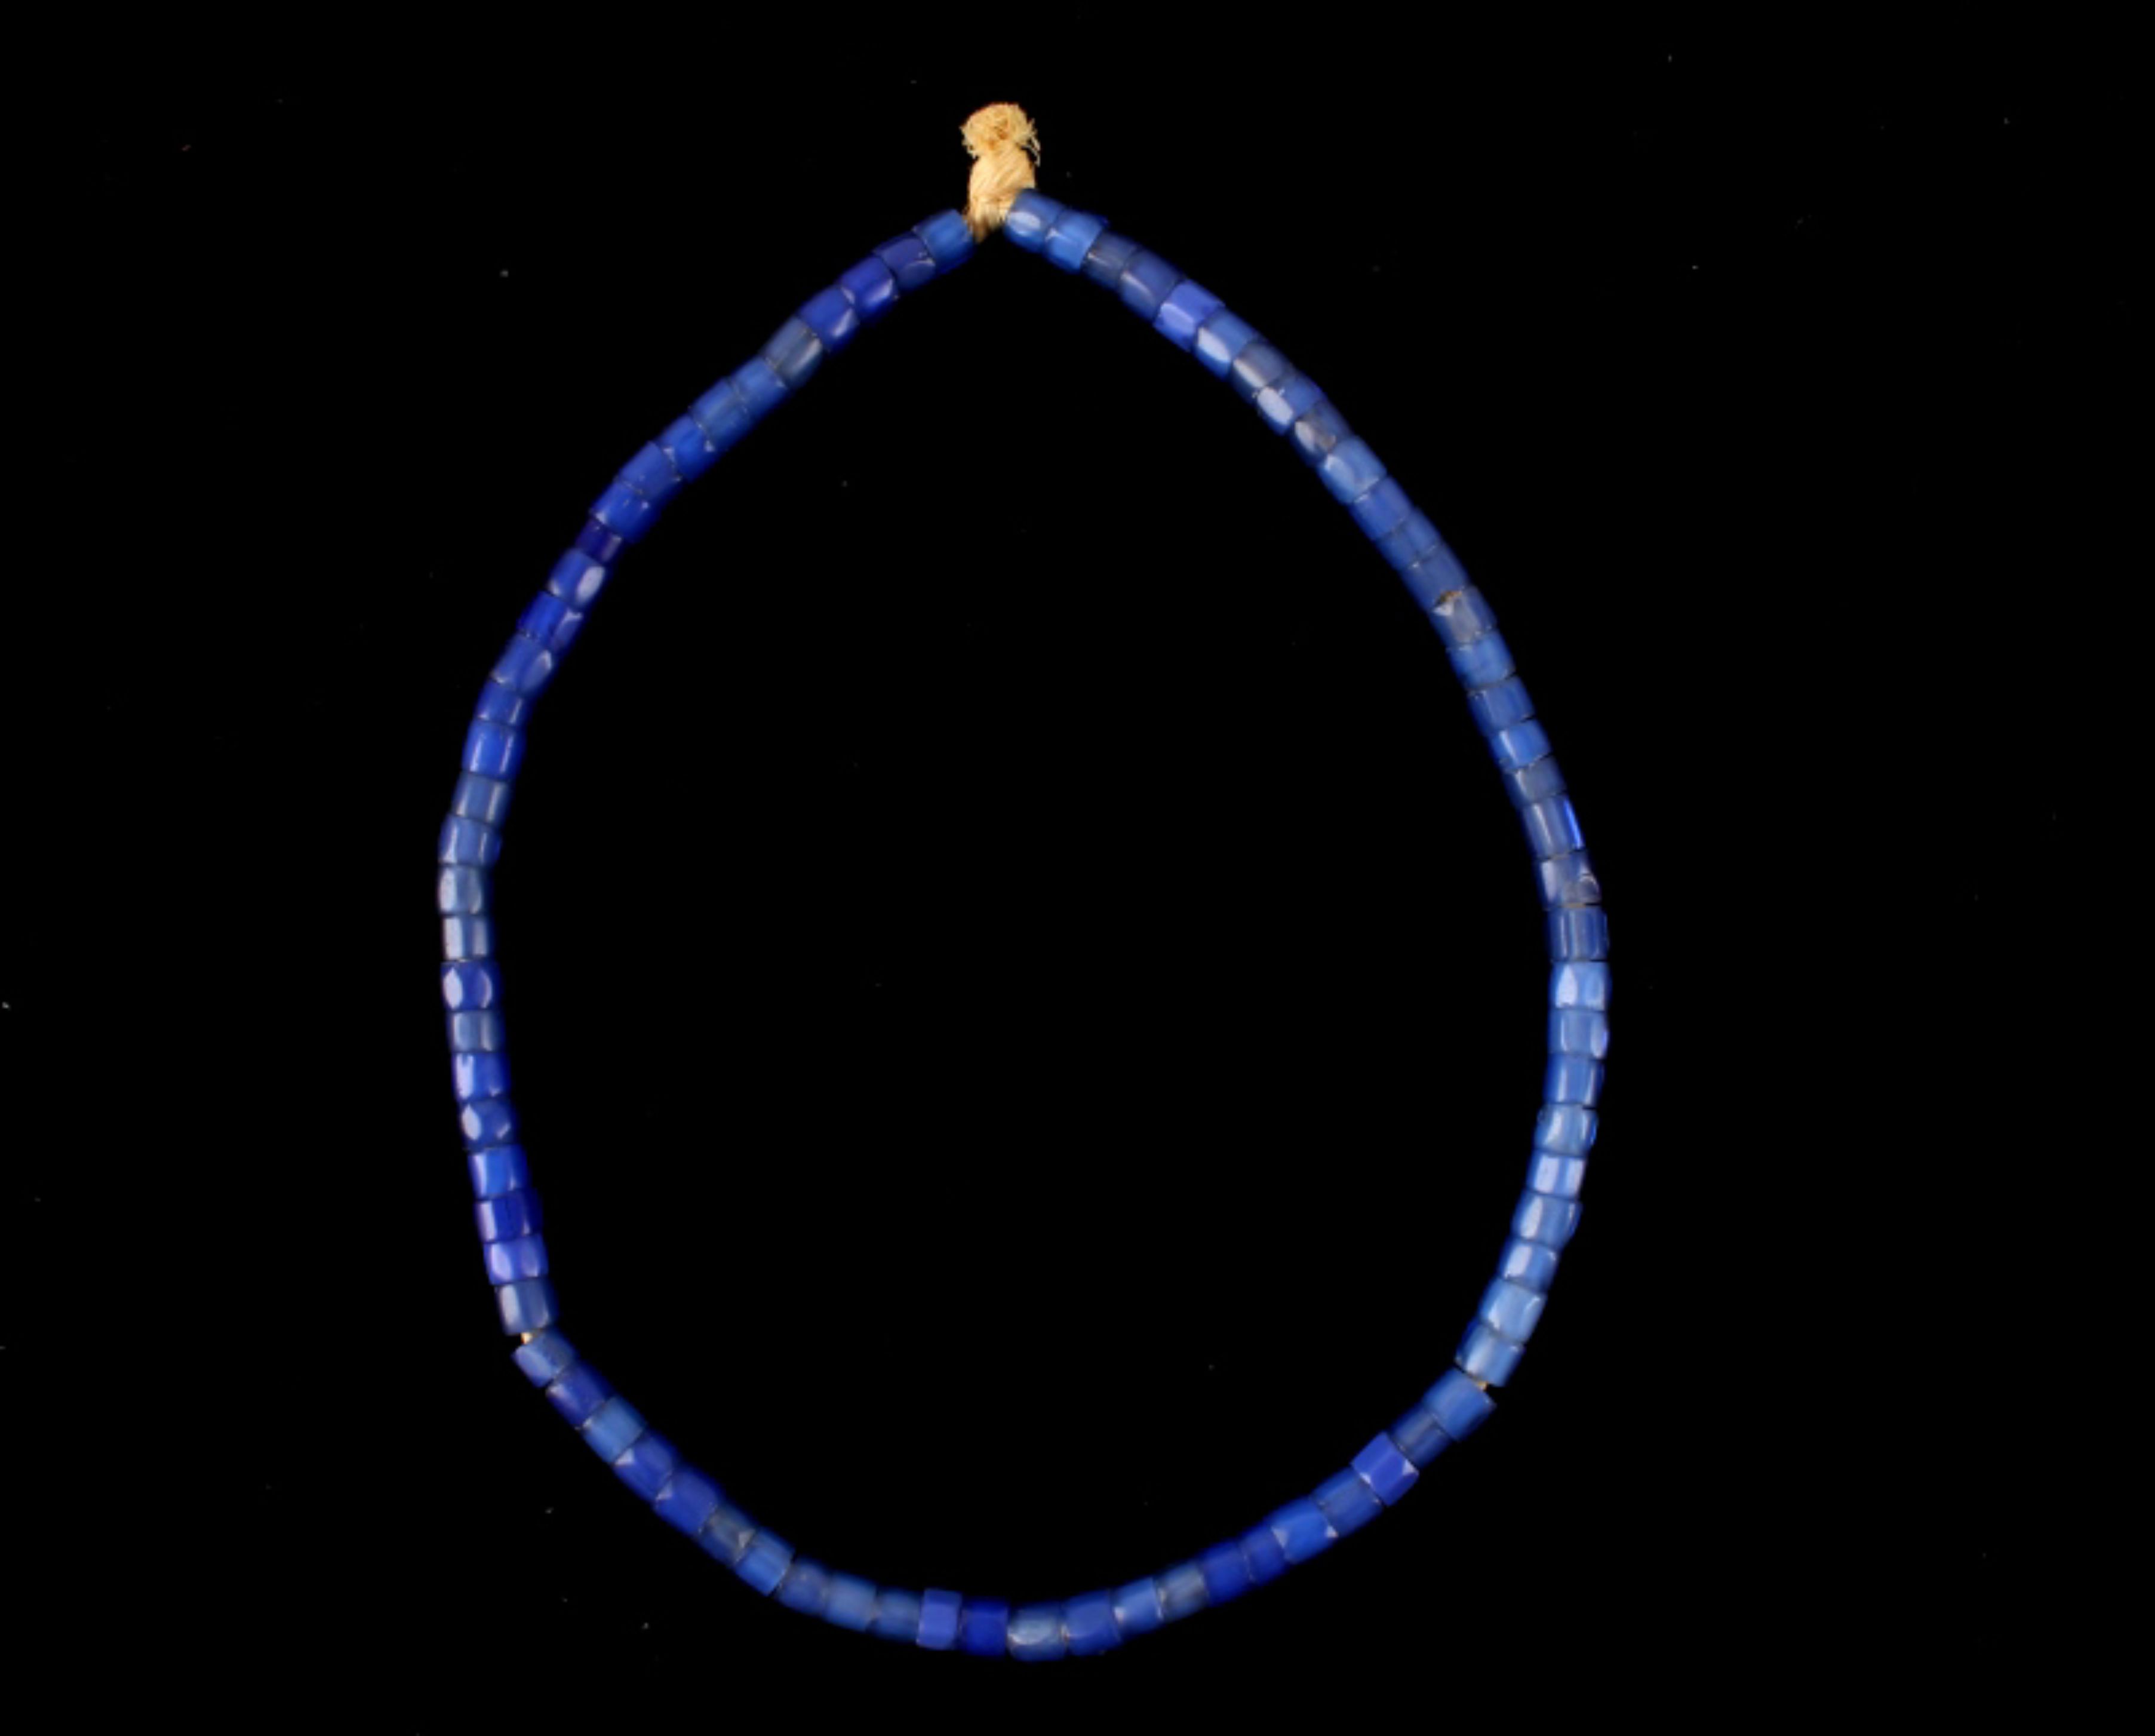 African Cobalt Glass Trade Bead Necklaces - Image 2 of 17